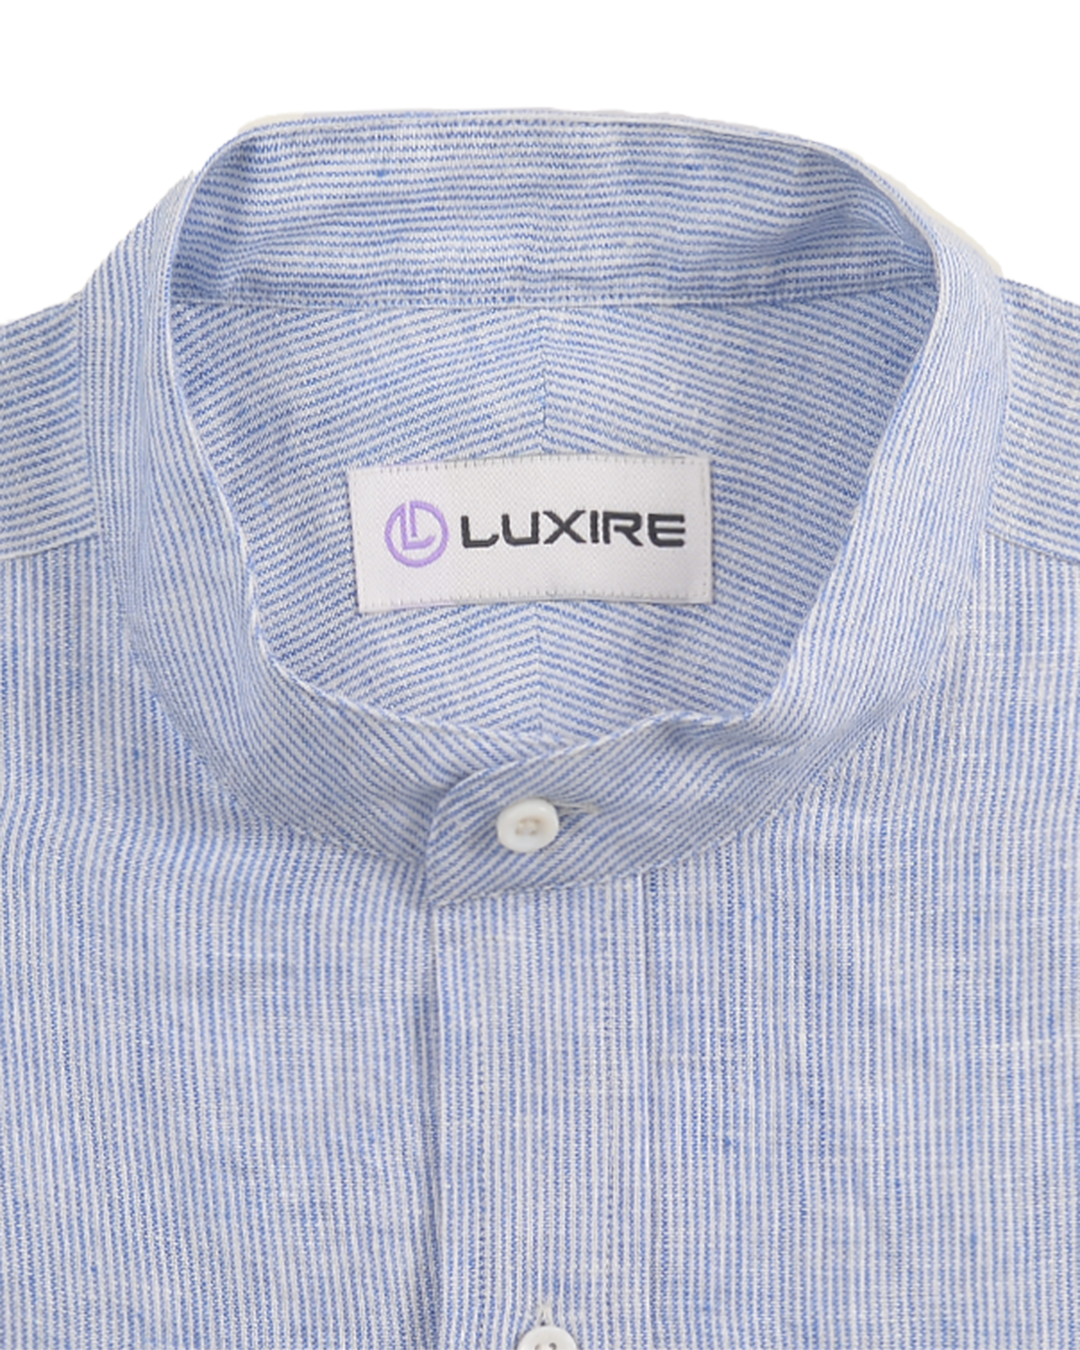 Collar of the custom linen shirt for men in blue and white dress stripe by Luxire Clothing